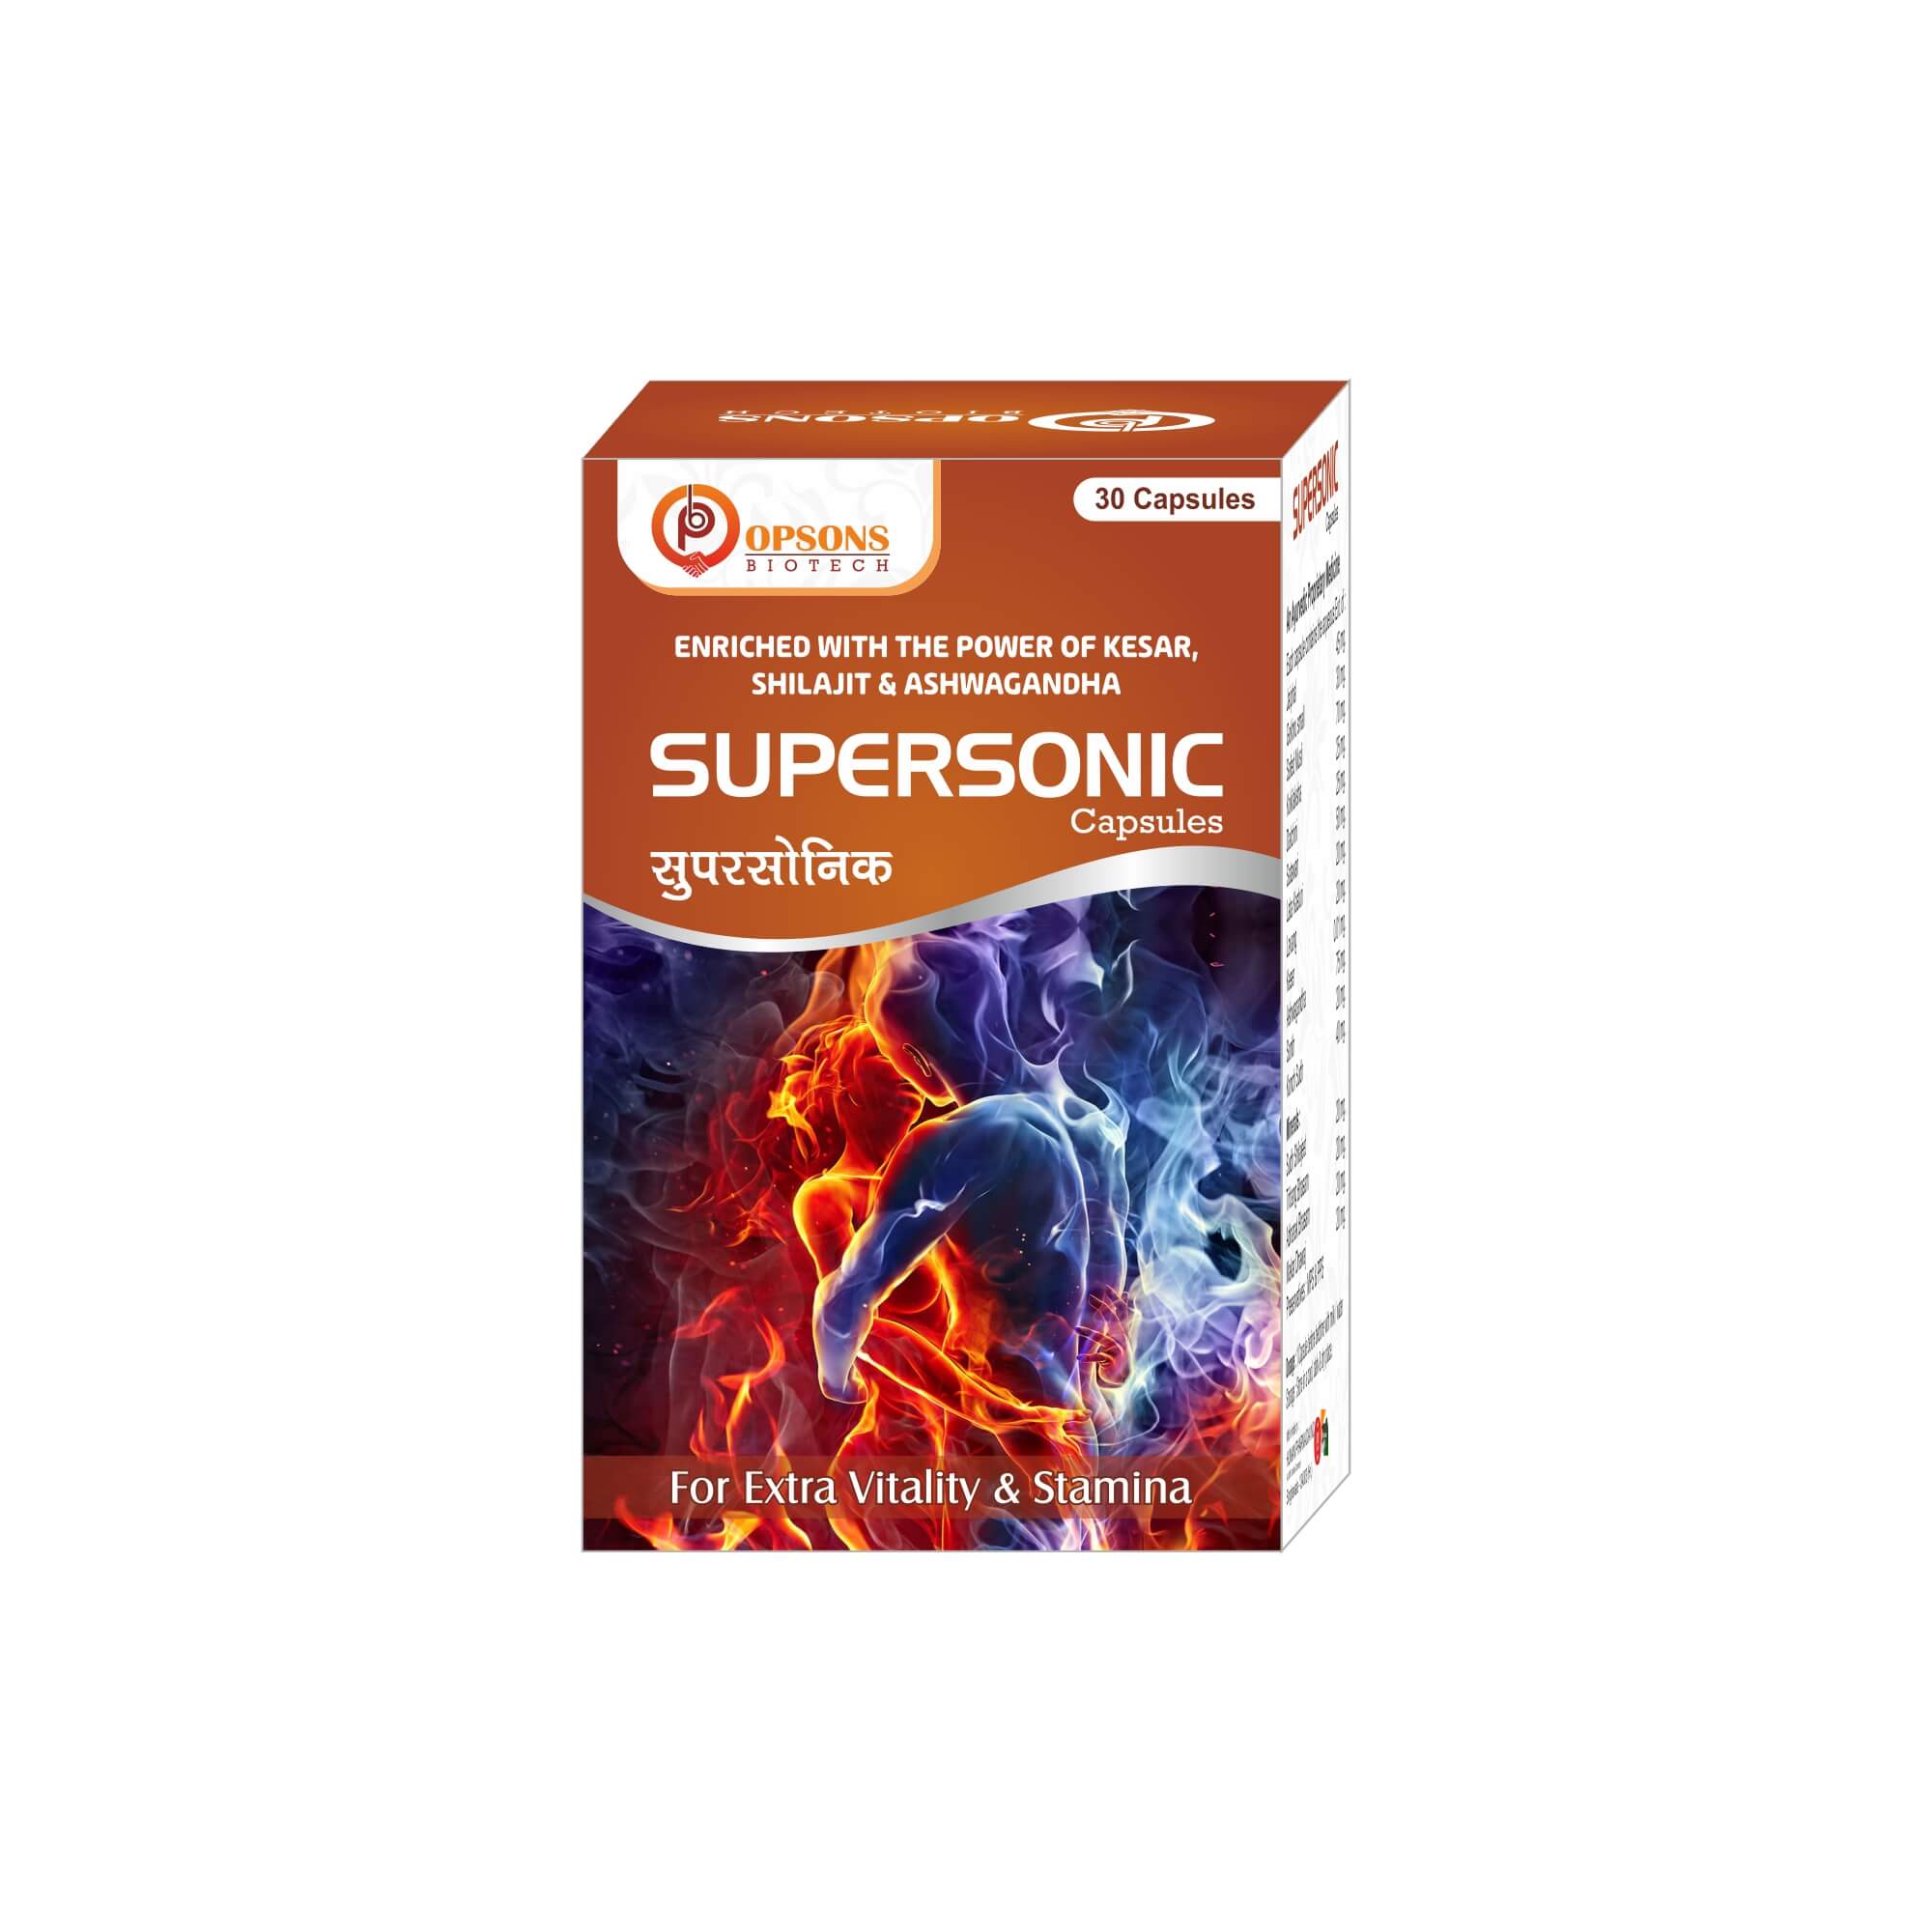 Product Name: Supersonic Capsules, Compositions of are Enriched With The Powder Of Kesar, Shilajit  & Ashwagandha - Opsons Biotech